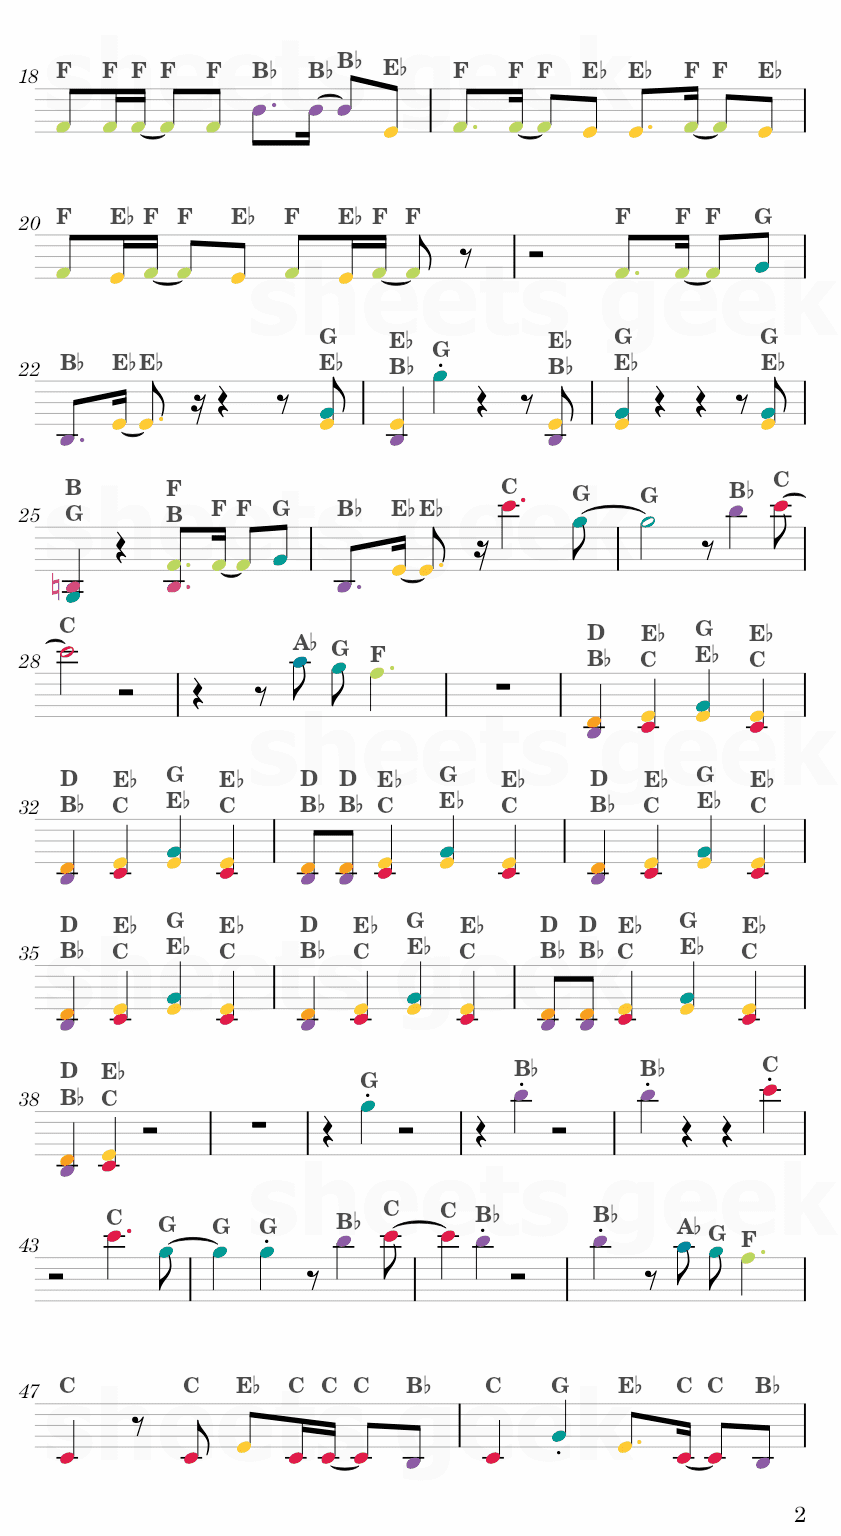 NewJeans (뉴진스) ASAP Easy Sheet Music Free for piano, keyboard, flute, violin, sax, cello page 2